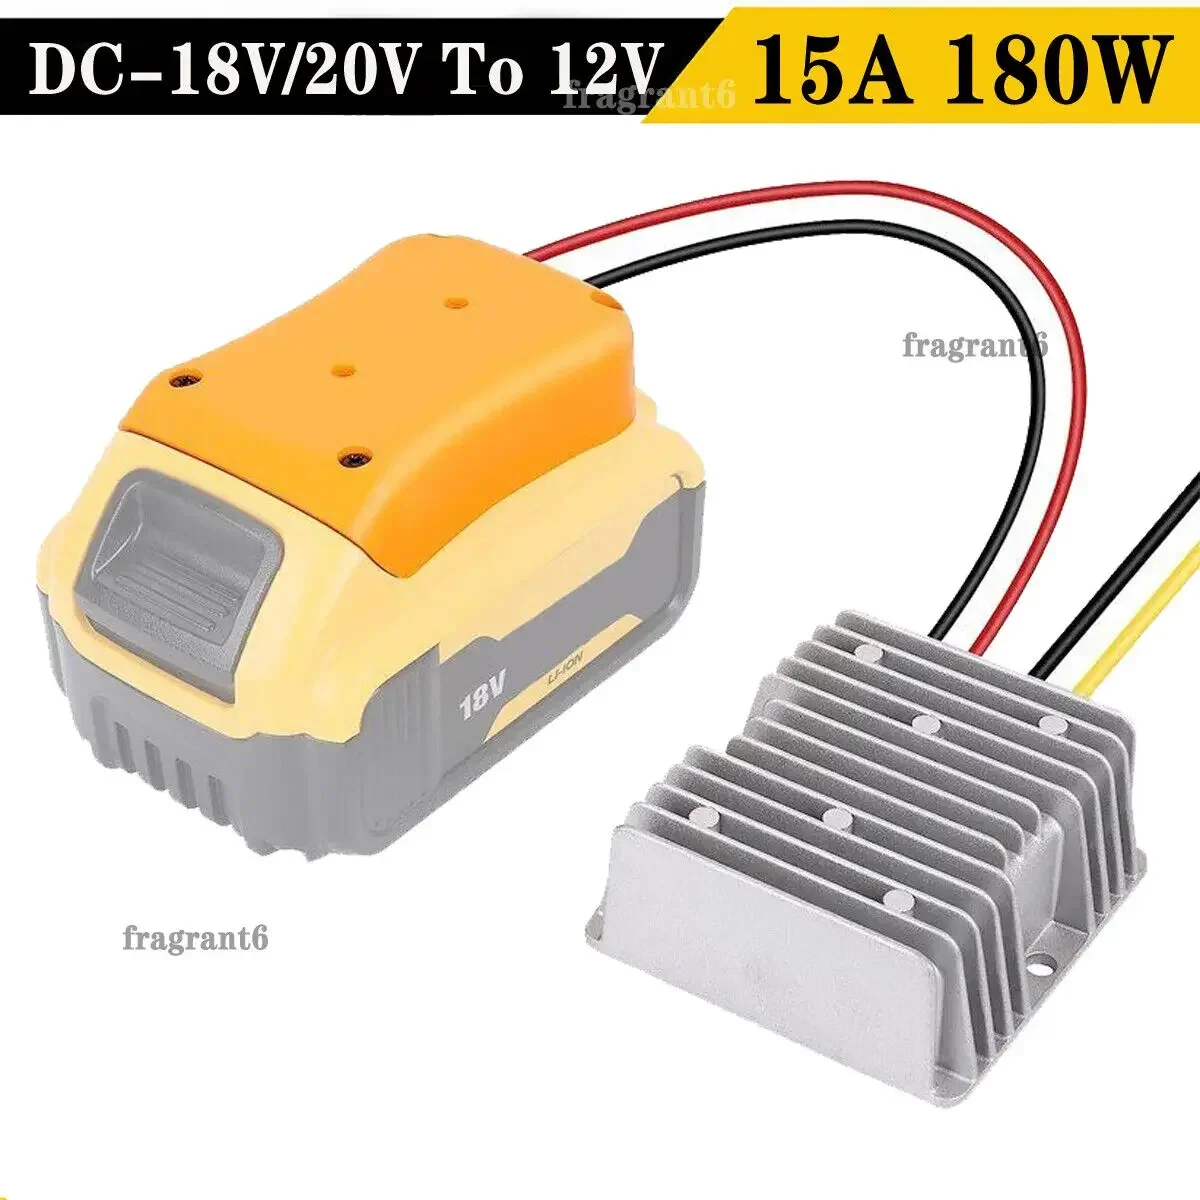 Step Down Converter 20V To 12V Adapter for Dewalt 20V Li-ion Battery 15A 180W Adapter Automatic Buck Boost Converter Regulator adjustable automatic boost